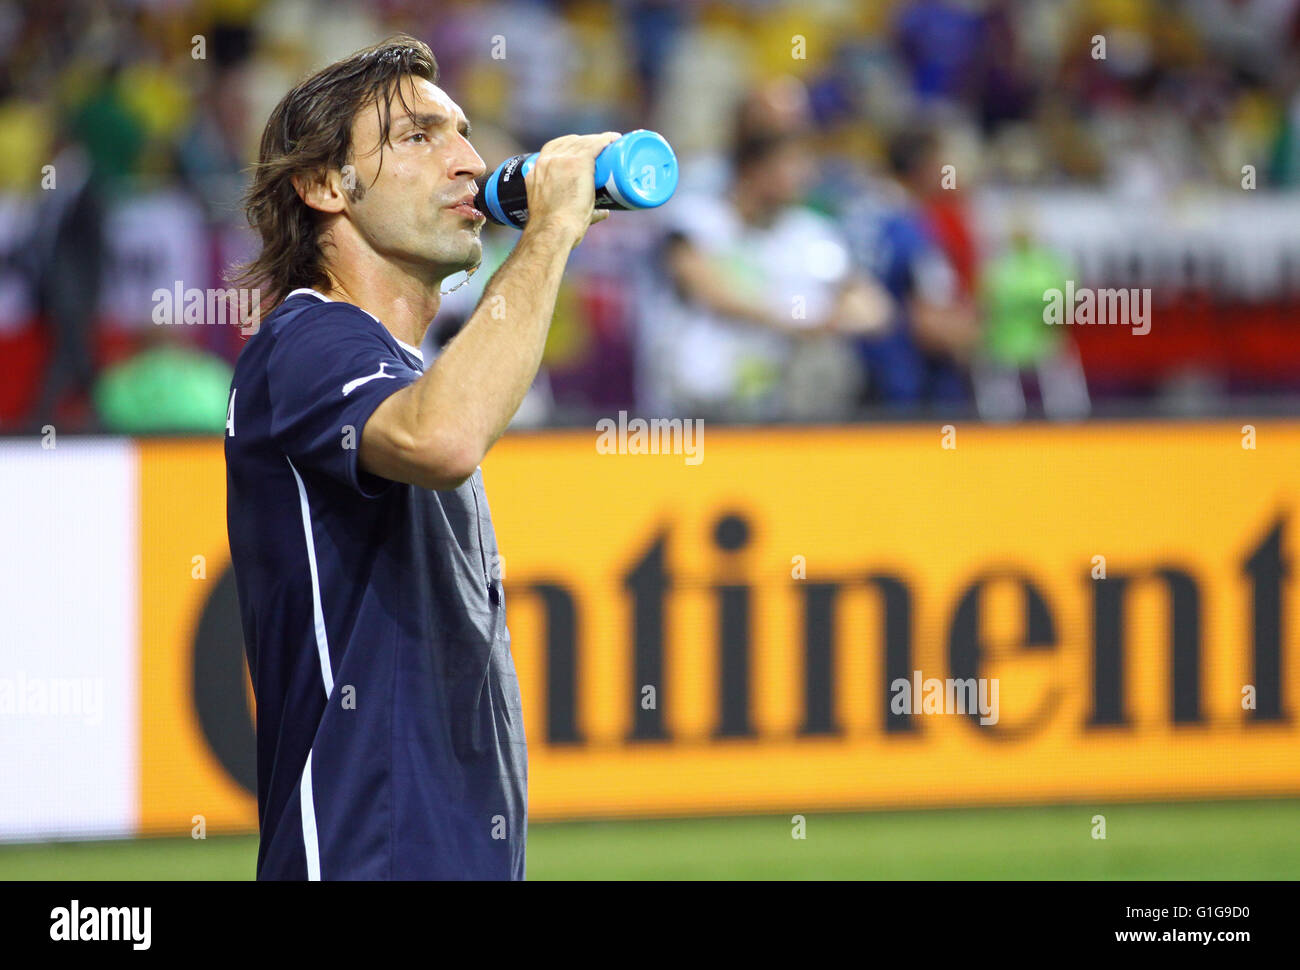 KYIV, UKRAINE - JULY 1, 2012: Andrea Pirlo of Italy drinks water during warm-up session before UEFA EURO 2012 Final game against Stock Photo